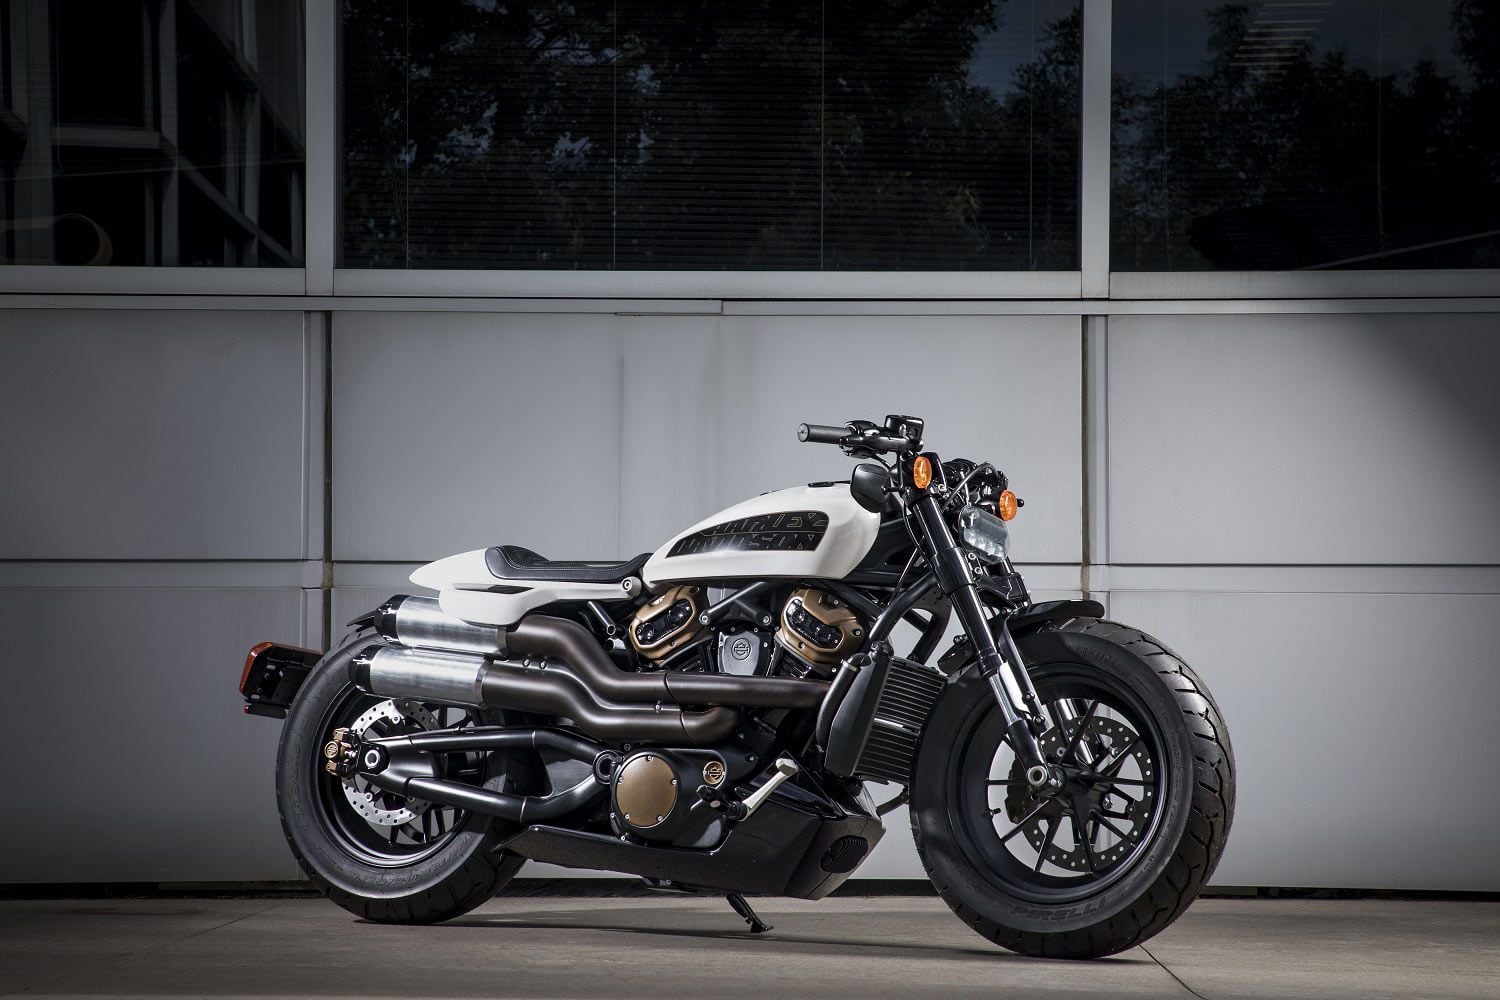 Harley Davidson Sportster S Name And Details Revealed Cycle World